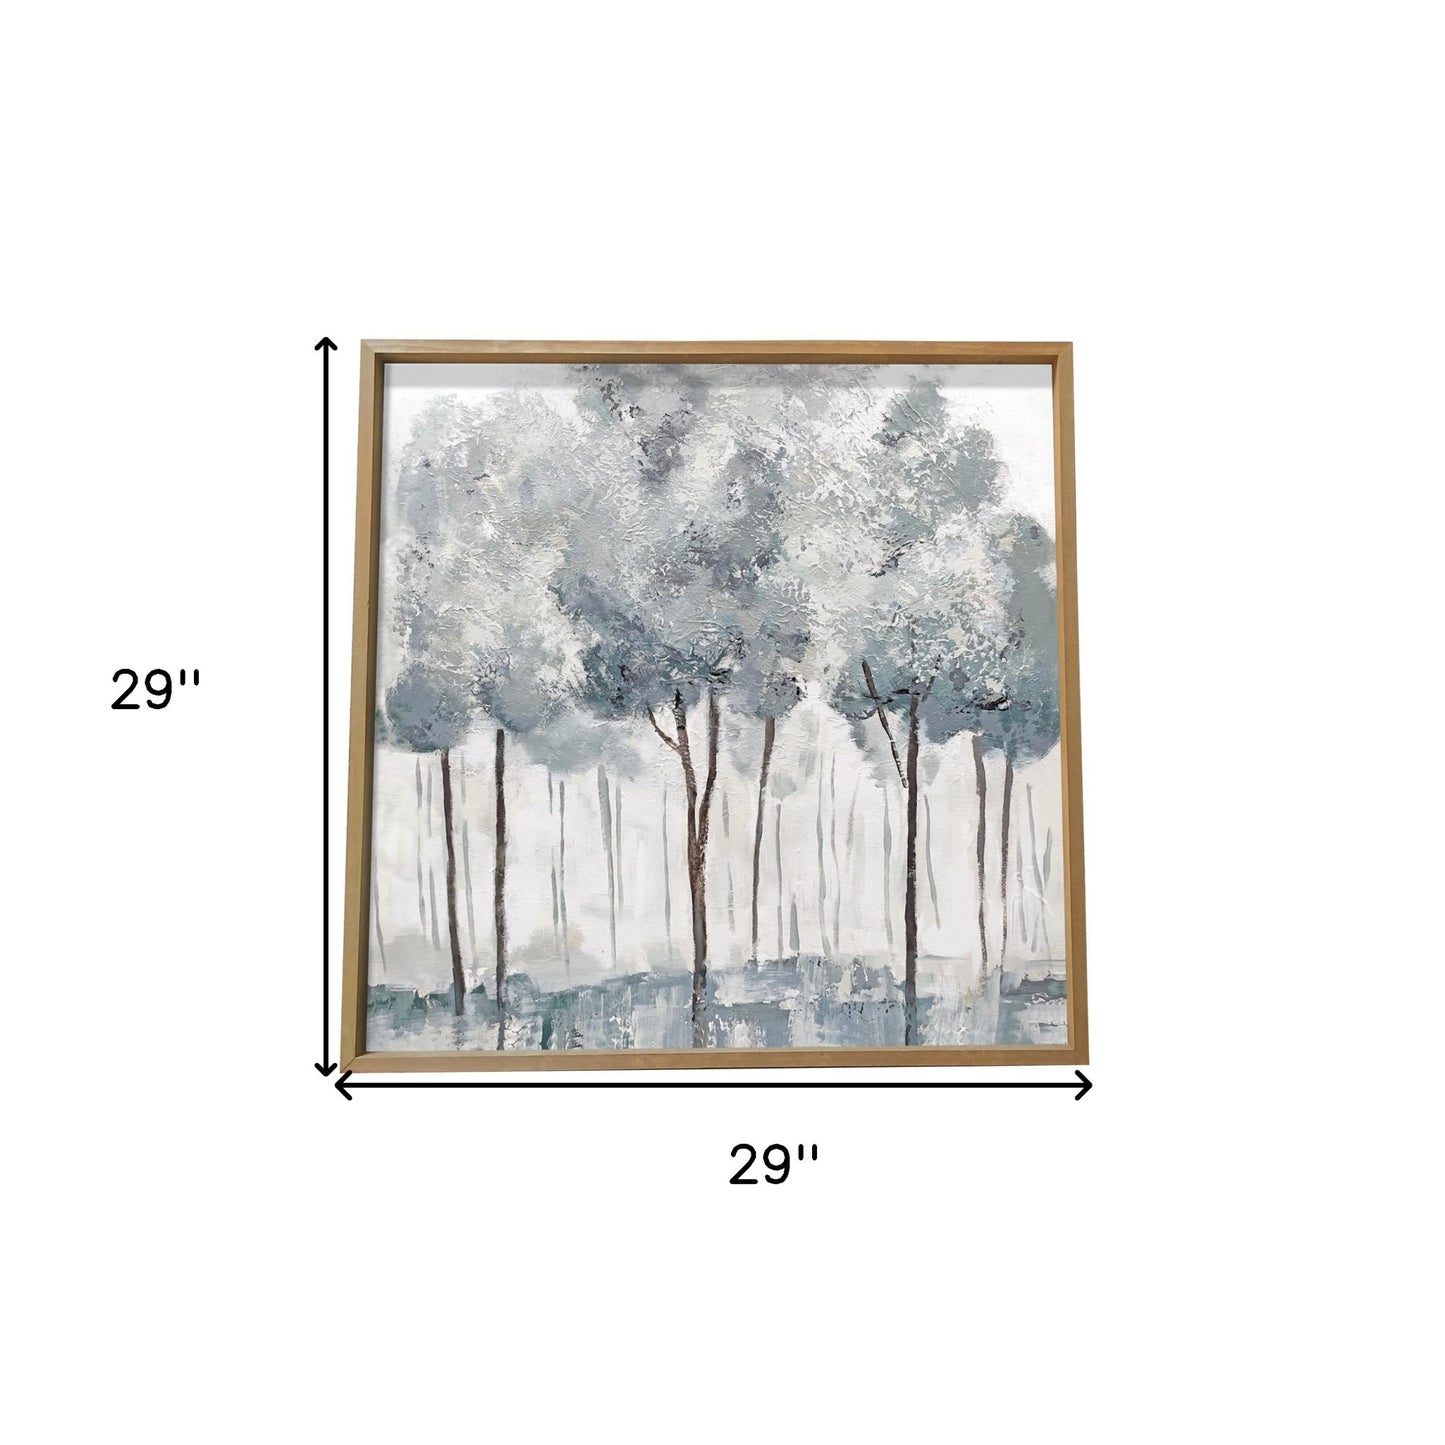 Modern All Over Blue Gray Forrest Canvas Wall Art